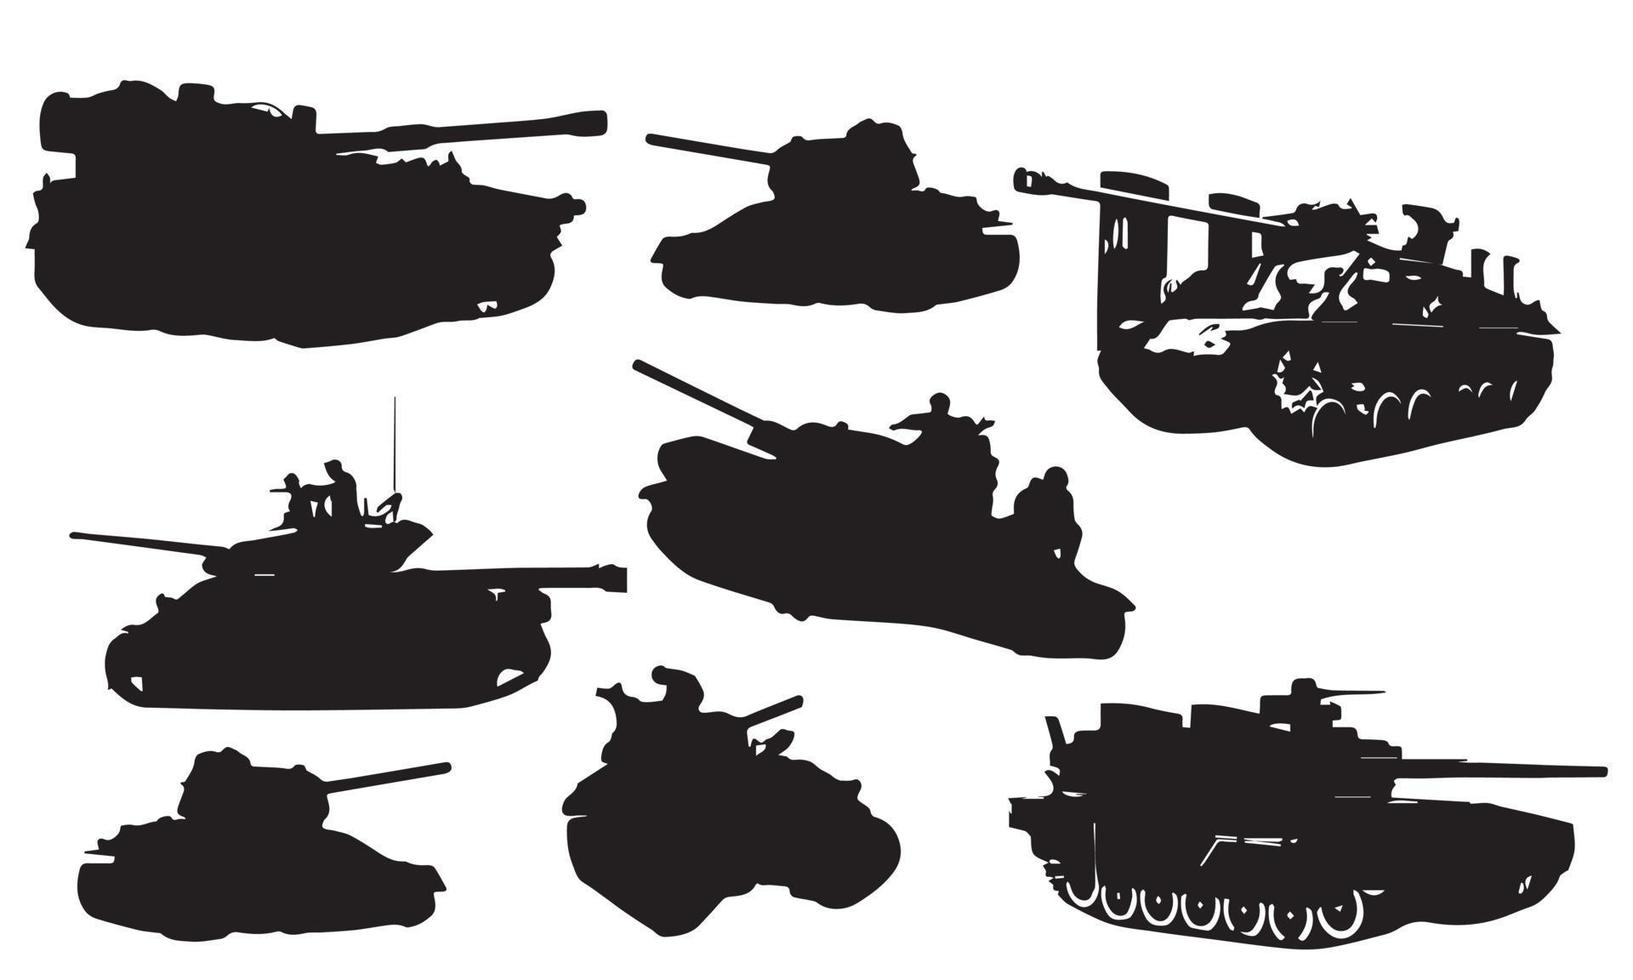 Tank and tank destroyers vector silhouettes vector illustration design